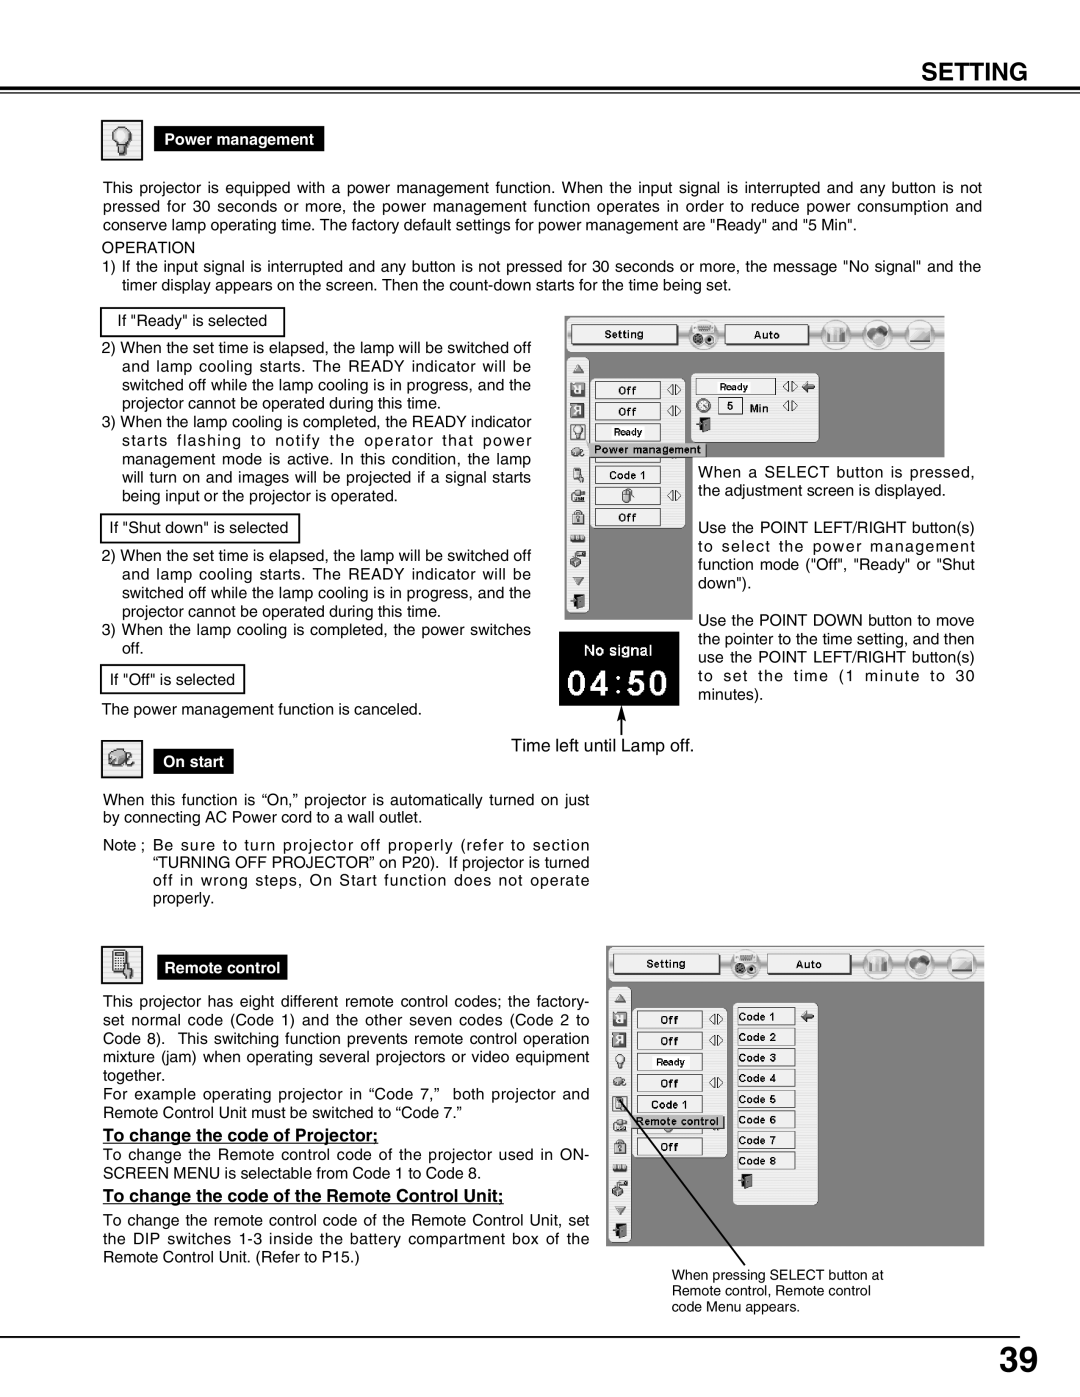 Eiki LC-X60 instruction manual Setting, Time left until Lamp off, To change the code of Projector 